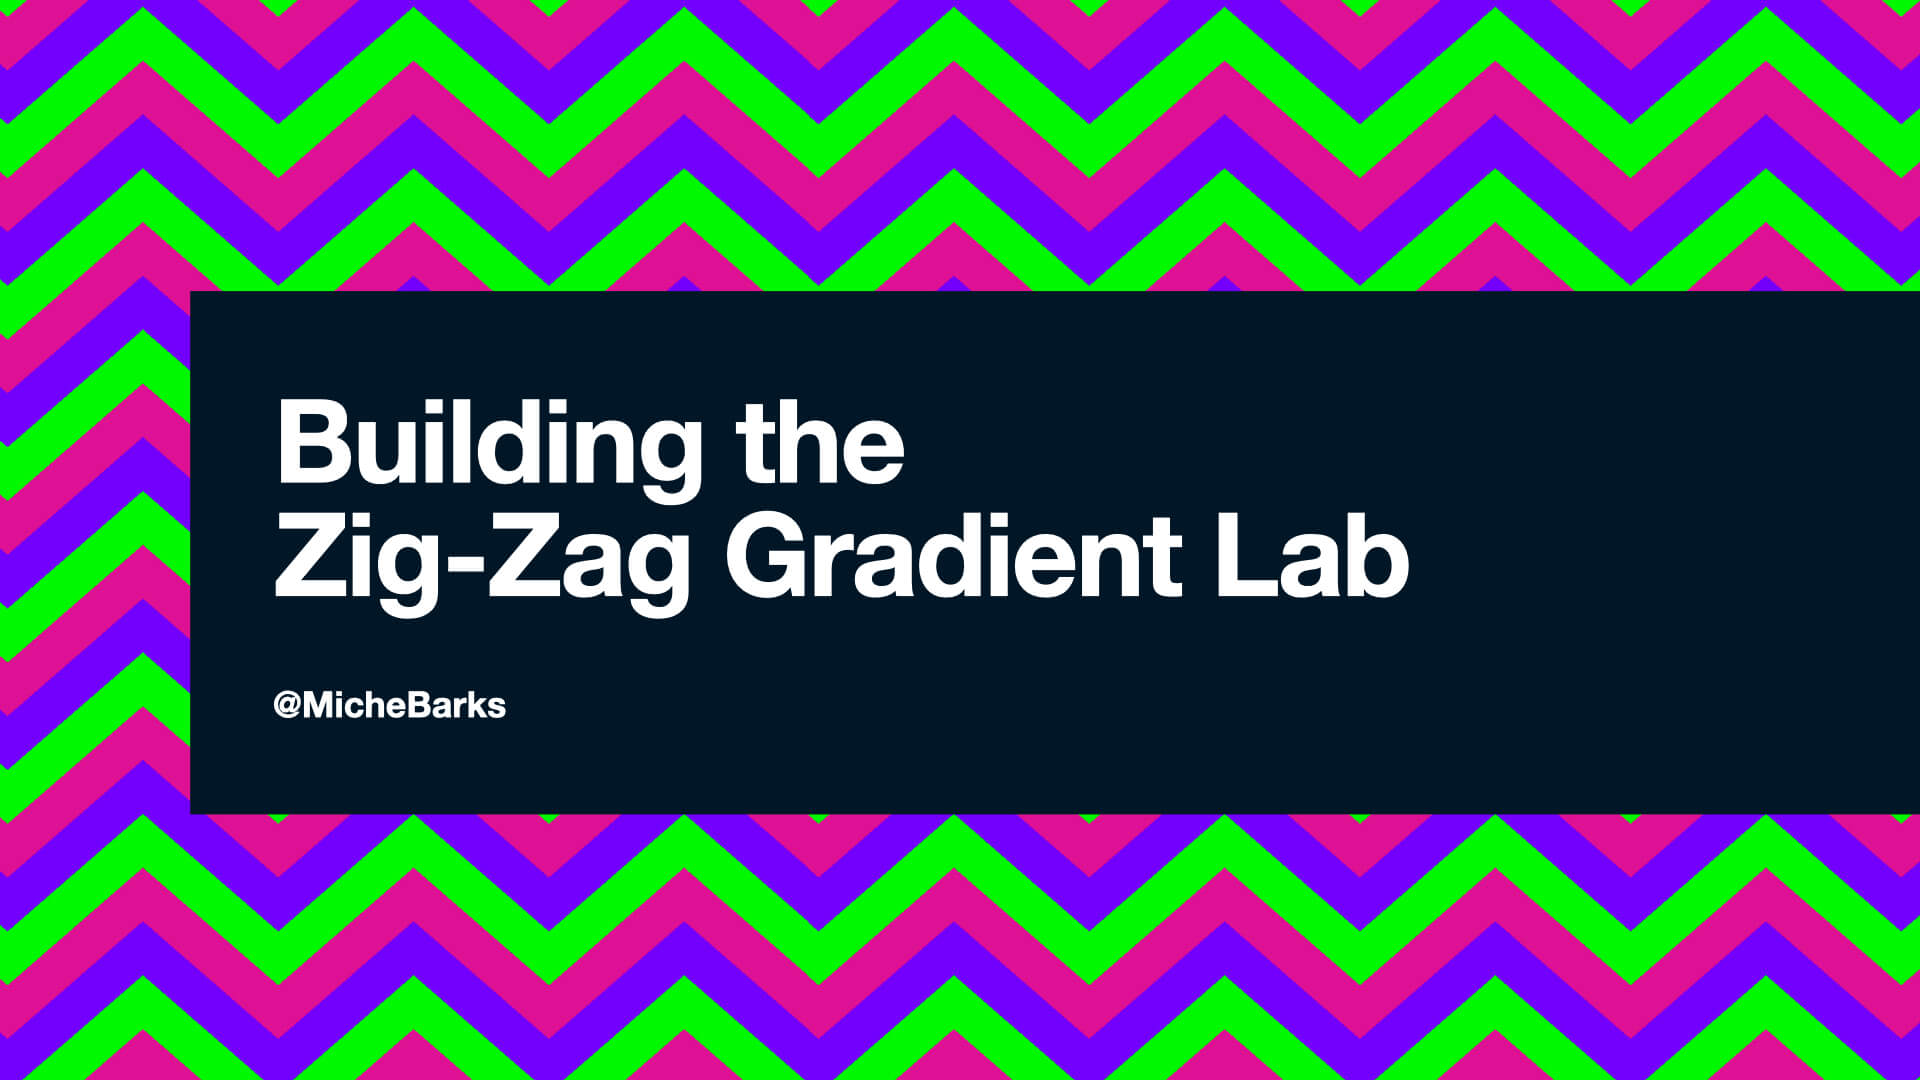 Opening slide from the talk, titled Building the Zig-Zag Gradient Lab, with colourful zig-zag background